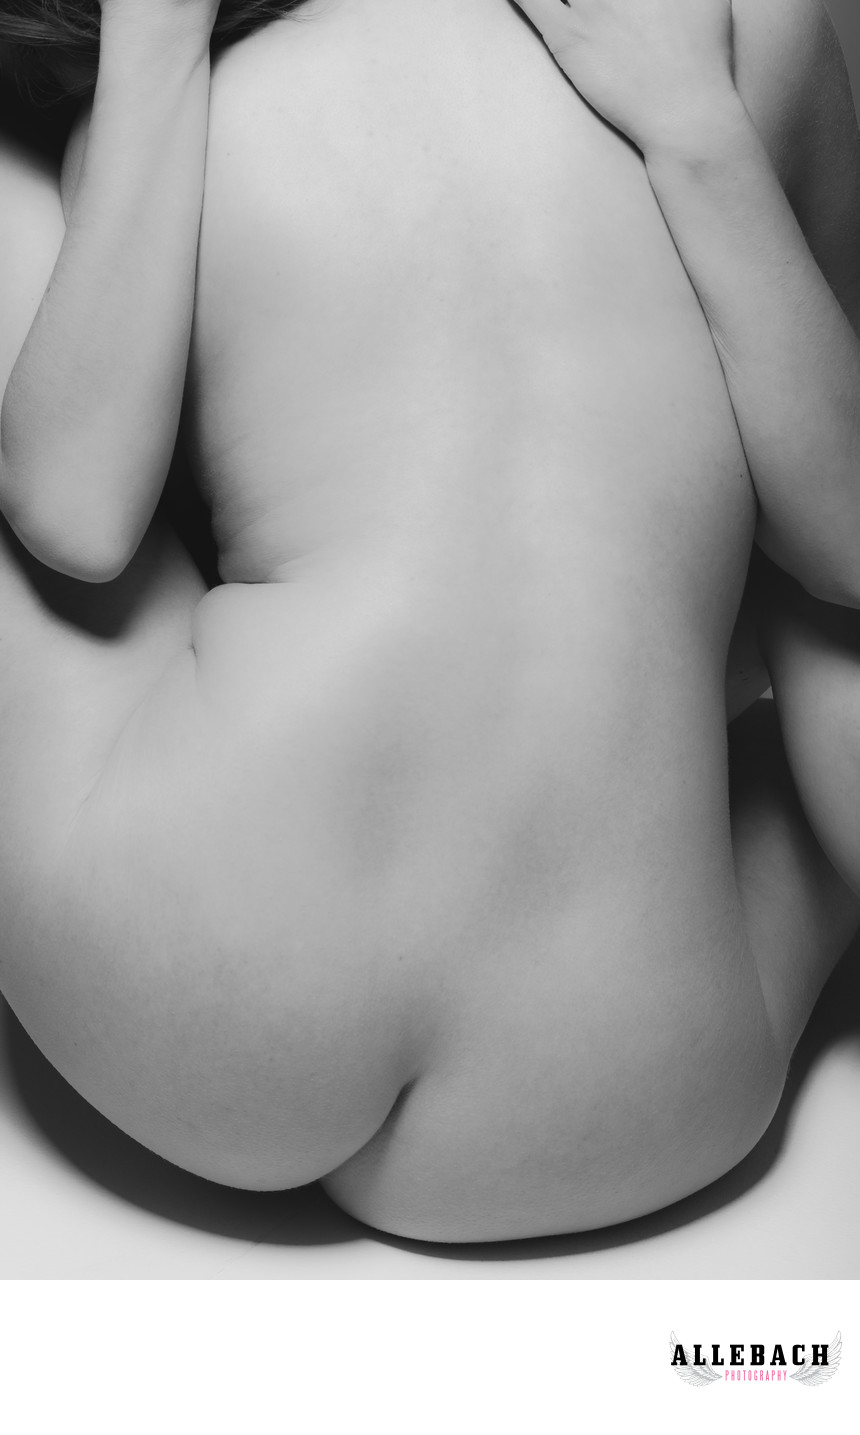 Fine art nudes for your 